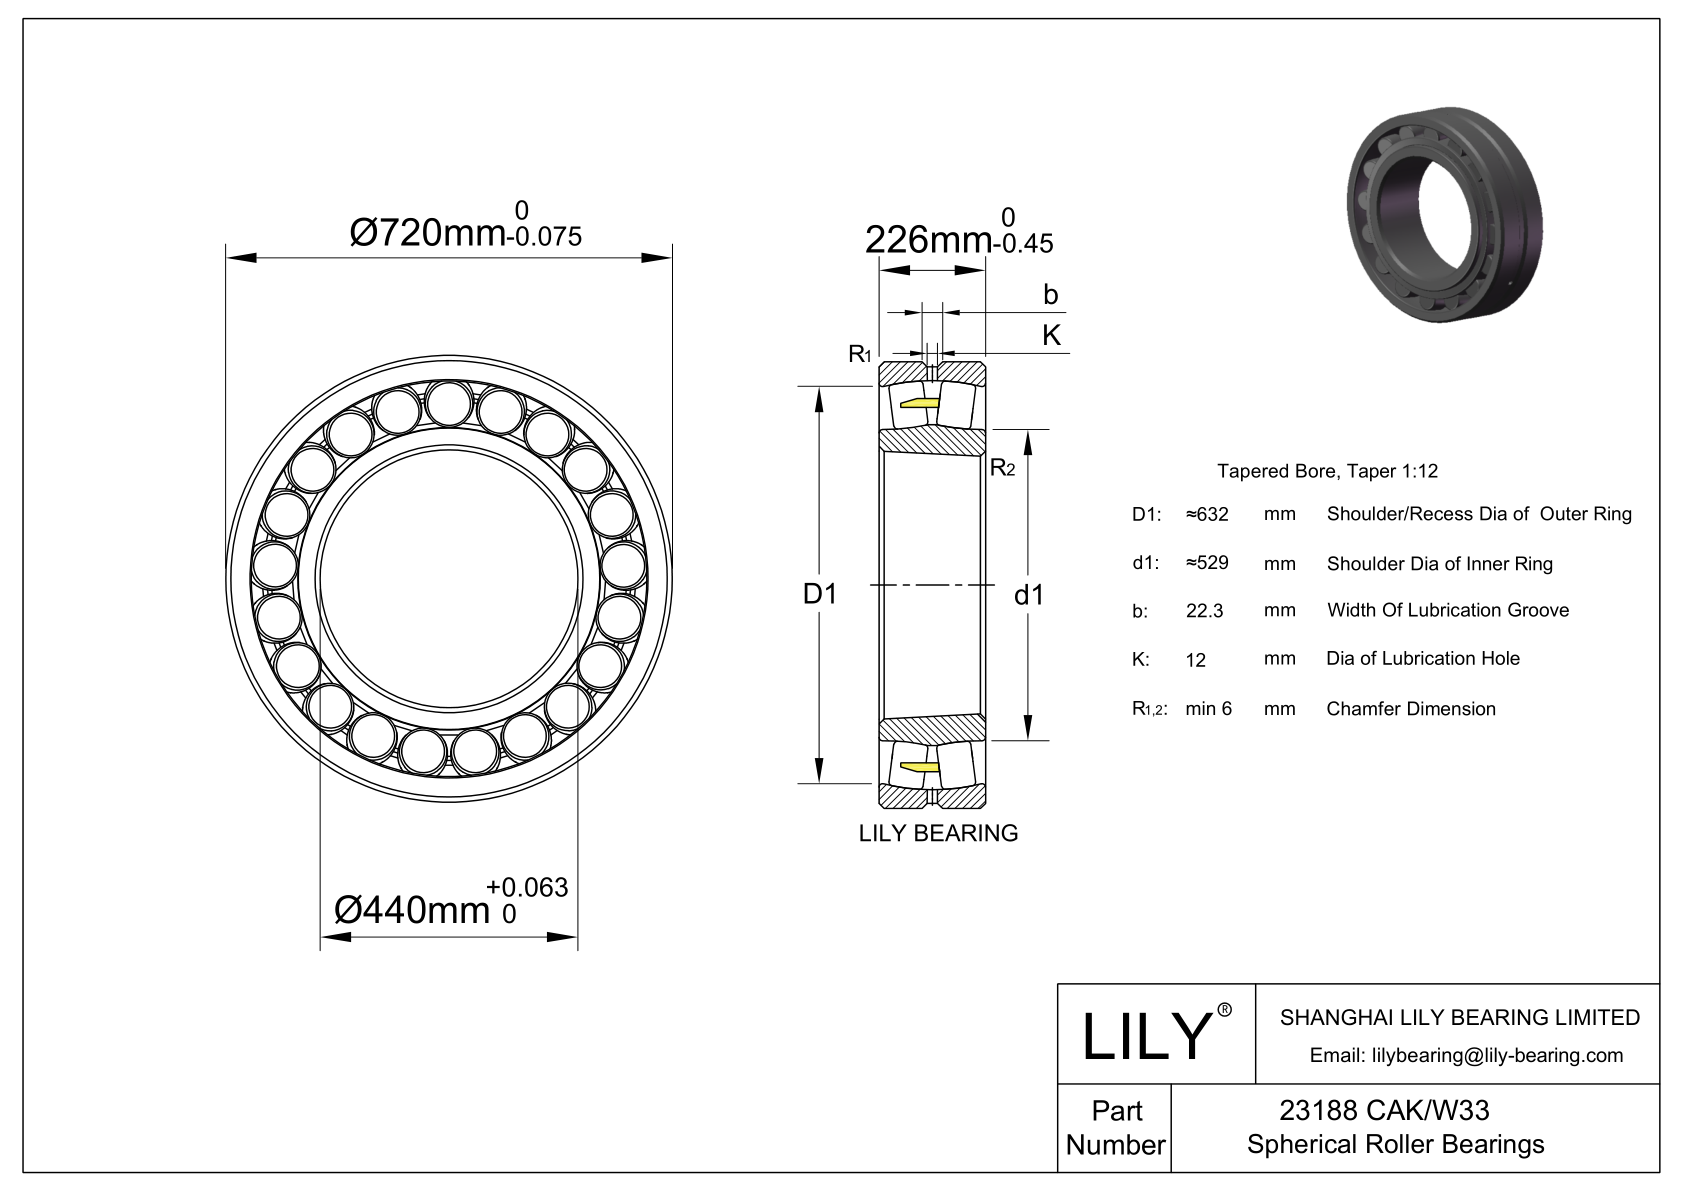 23188 CAK/W33 Double Row Spherical Roller Bearing cad drawing